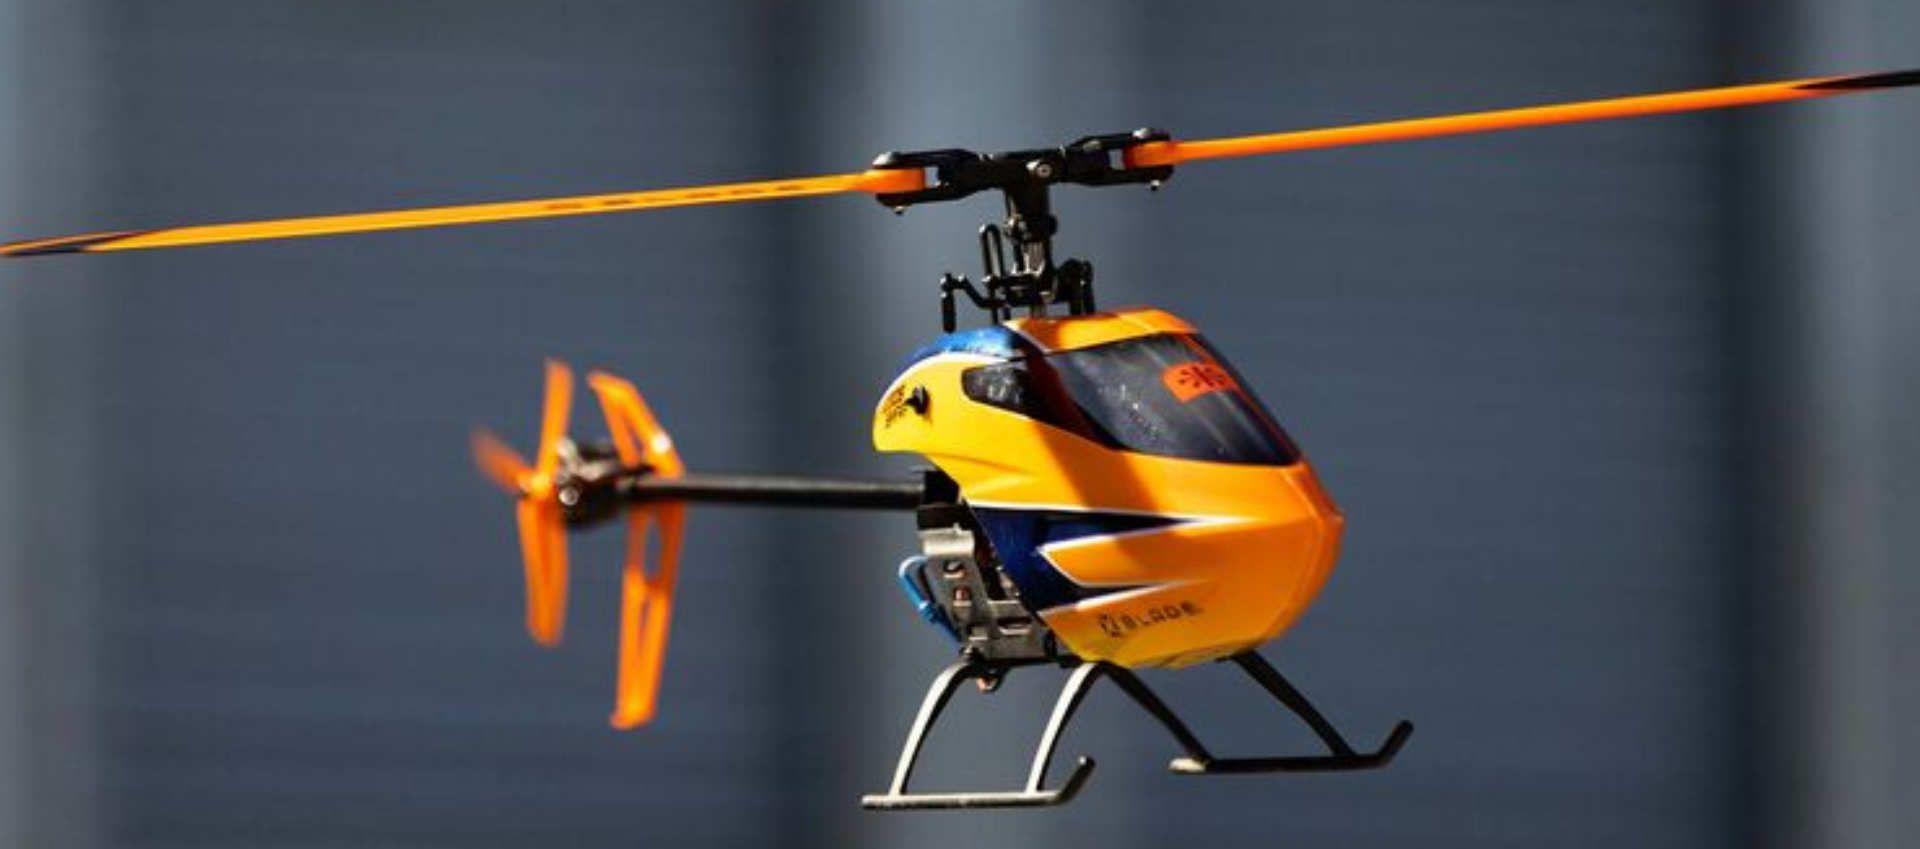 Scale Rc Helicopters: Choose Your Ideal RC Helicopter: From Micro to Large